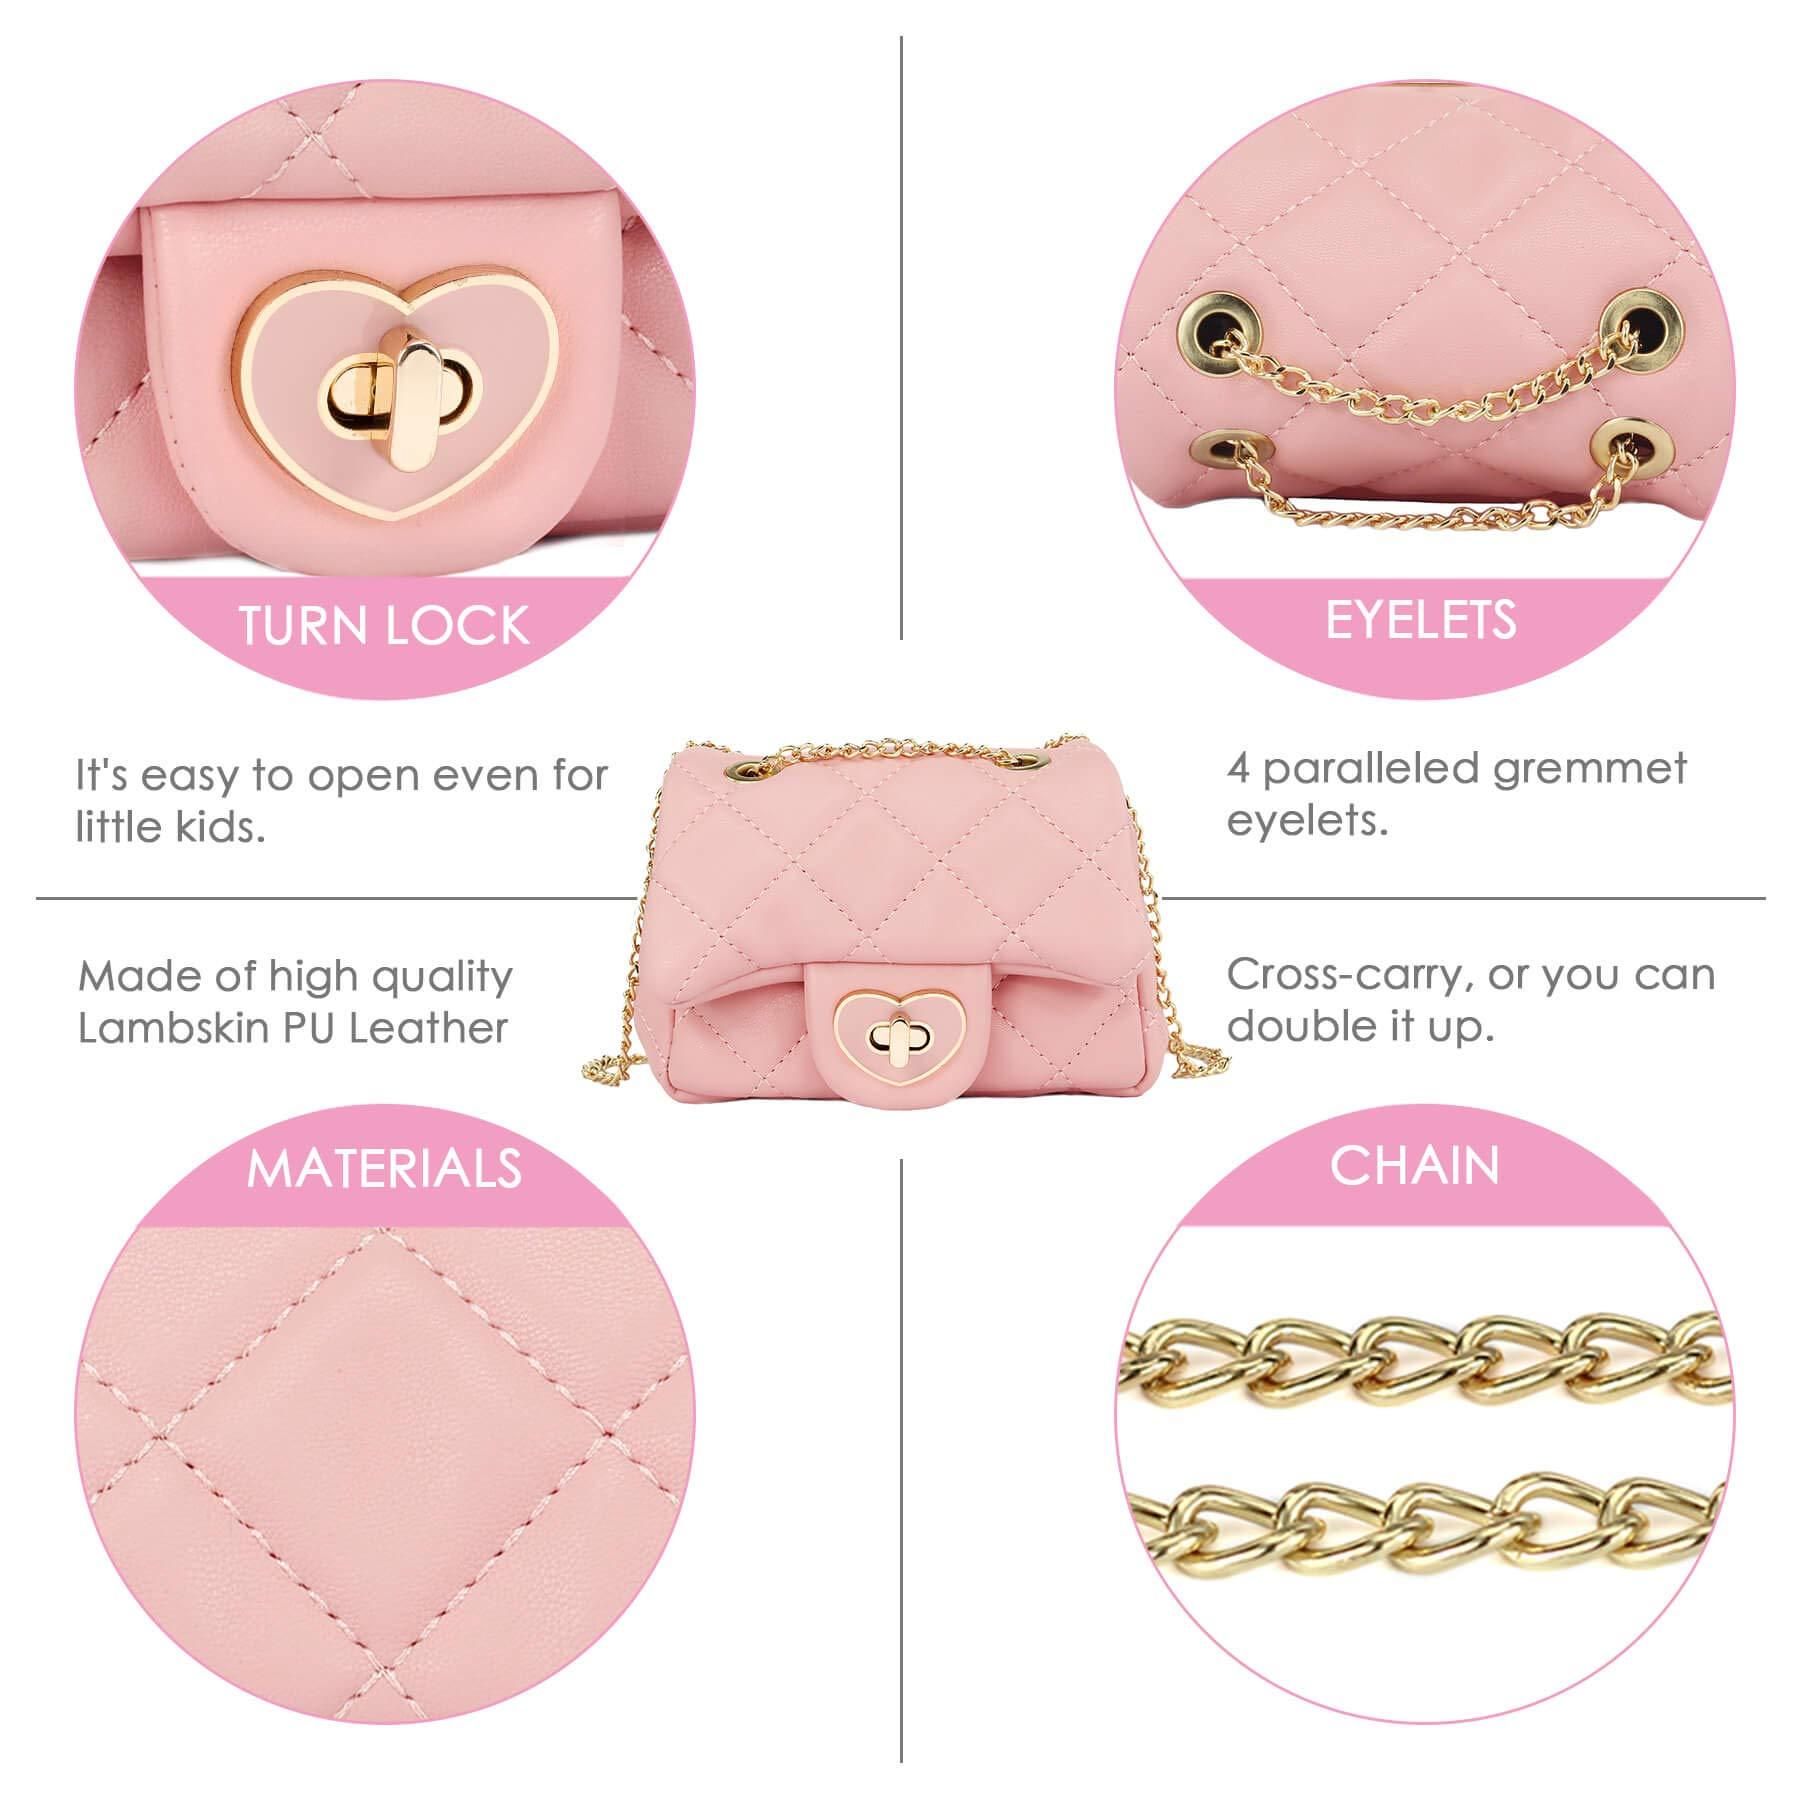 Toddler Mini Purse-Recommended by TikTok@Its_nallely Crossbody Bag Discount code be applied while checkout 